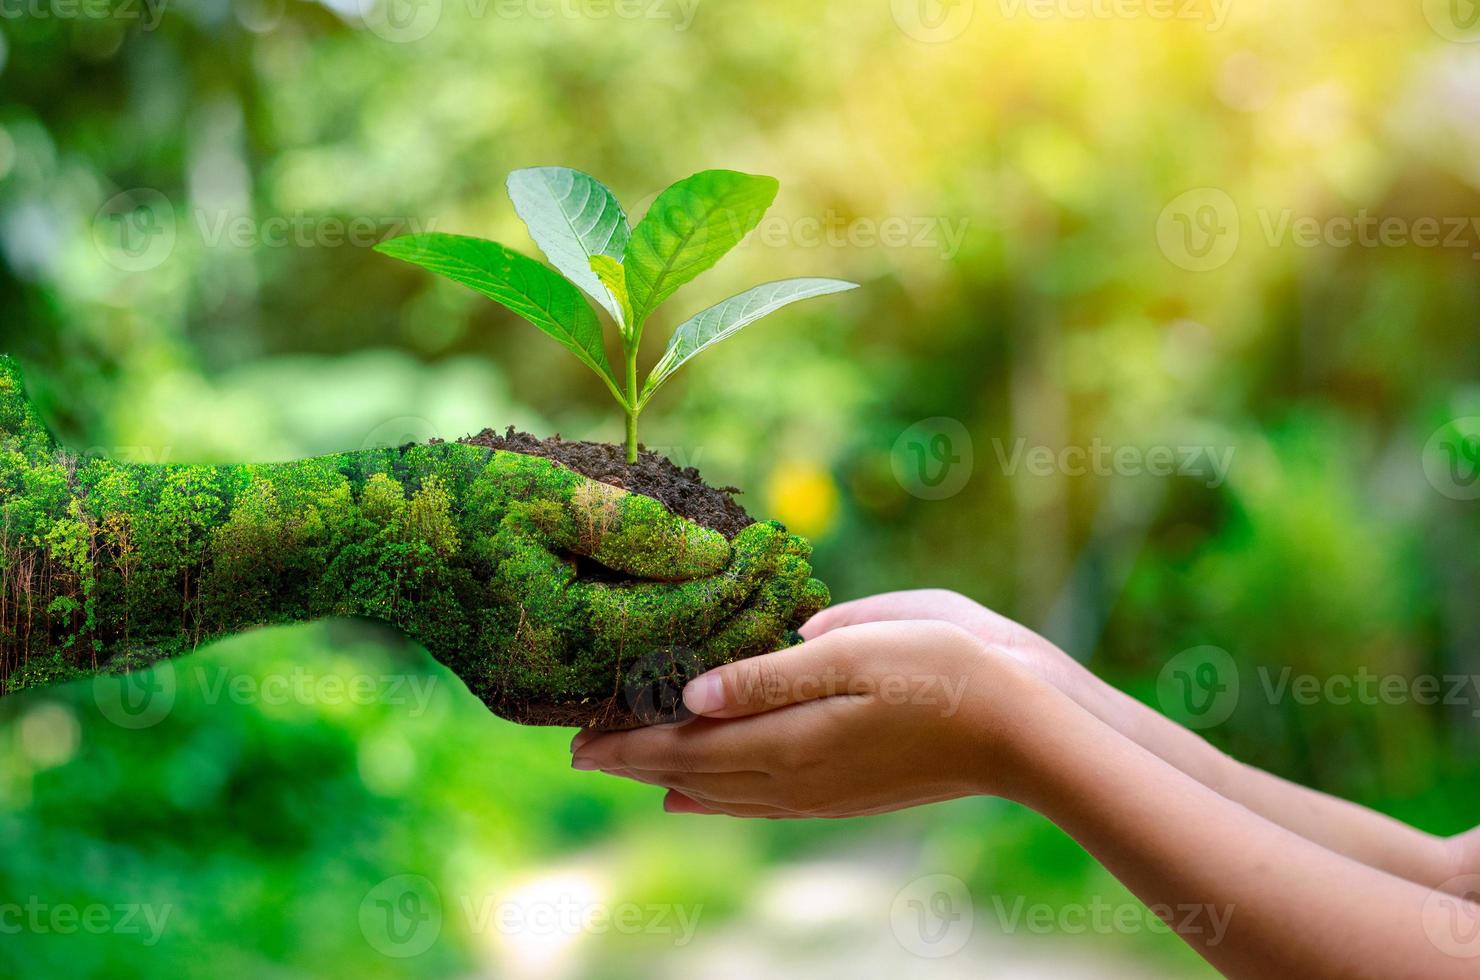 environment Earth Day In the hands of trees growing seedlings. Bokeh green Background Female hand holding tree on nature field grass Forest conservation concept photo